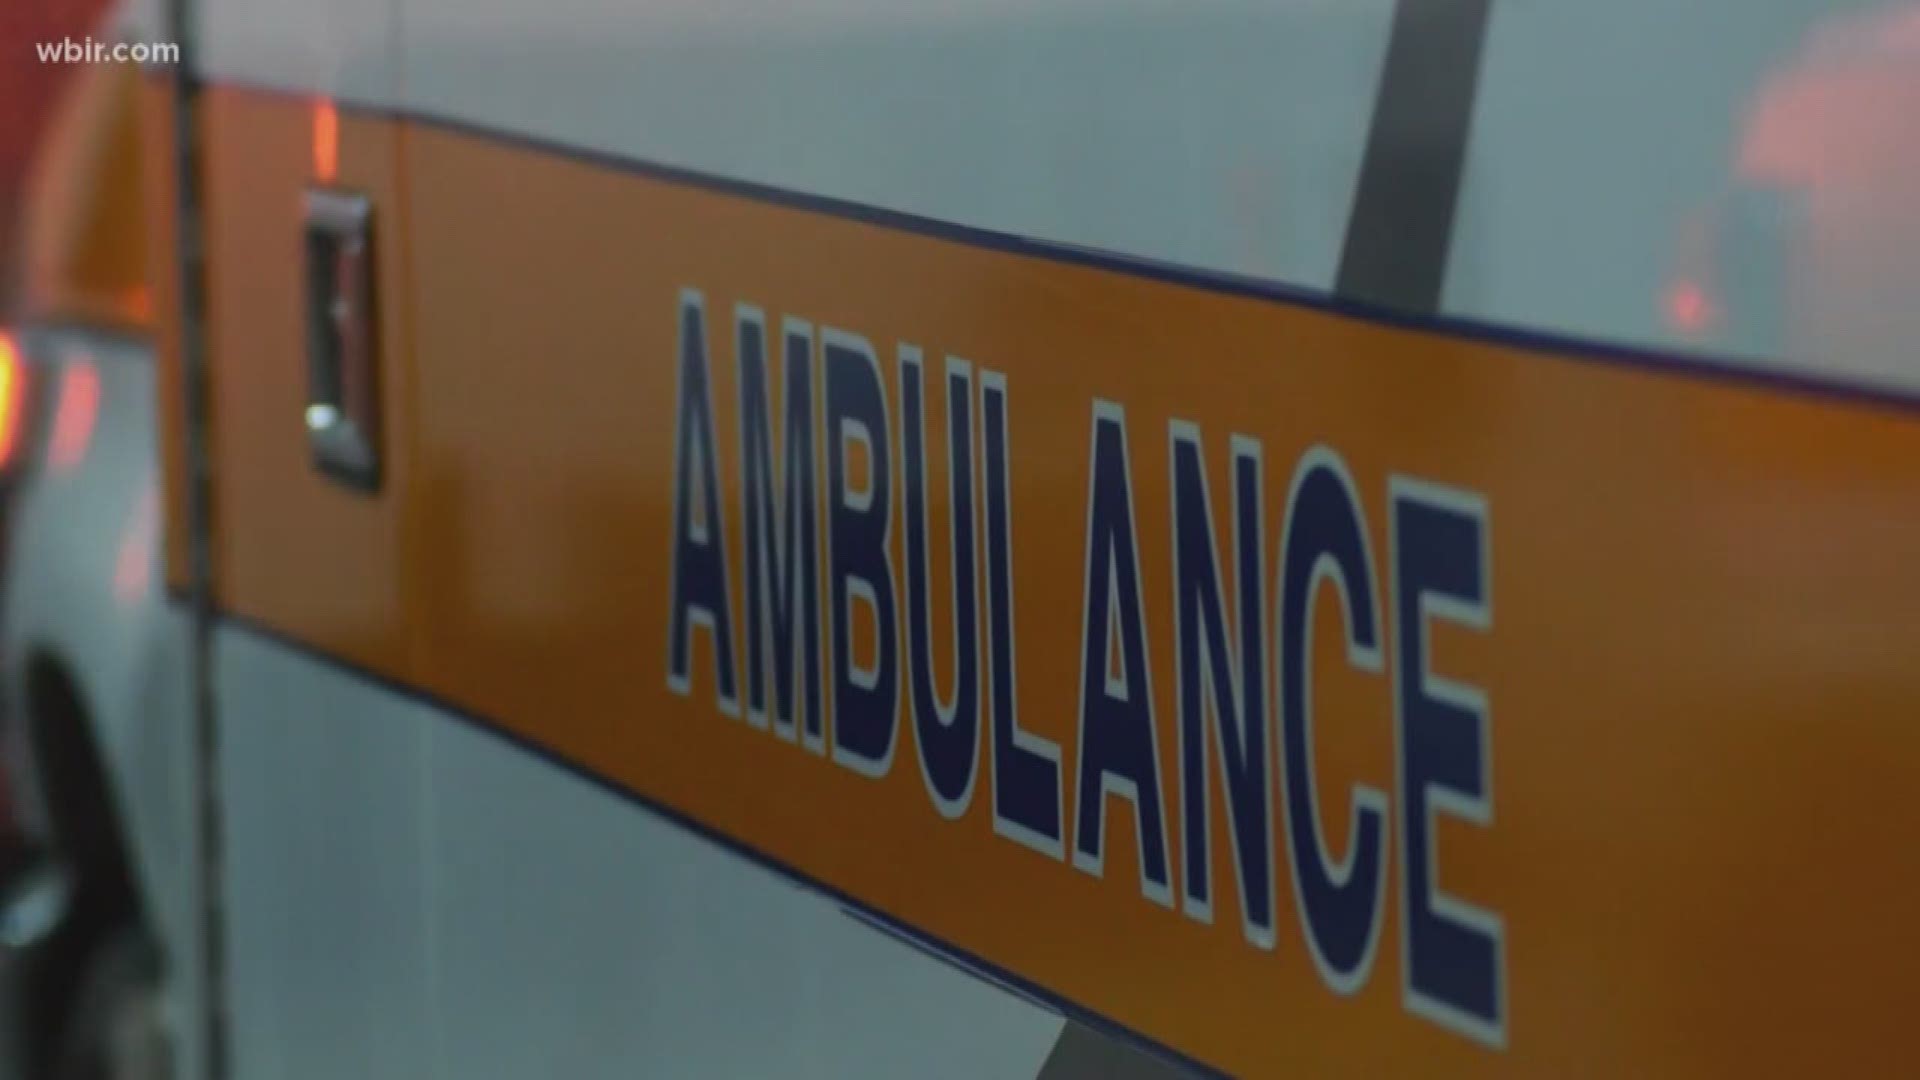 Long wait times at emergency rooms have prompted Knox County to make a temporary change to their Ambulance Service Agreement.